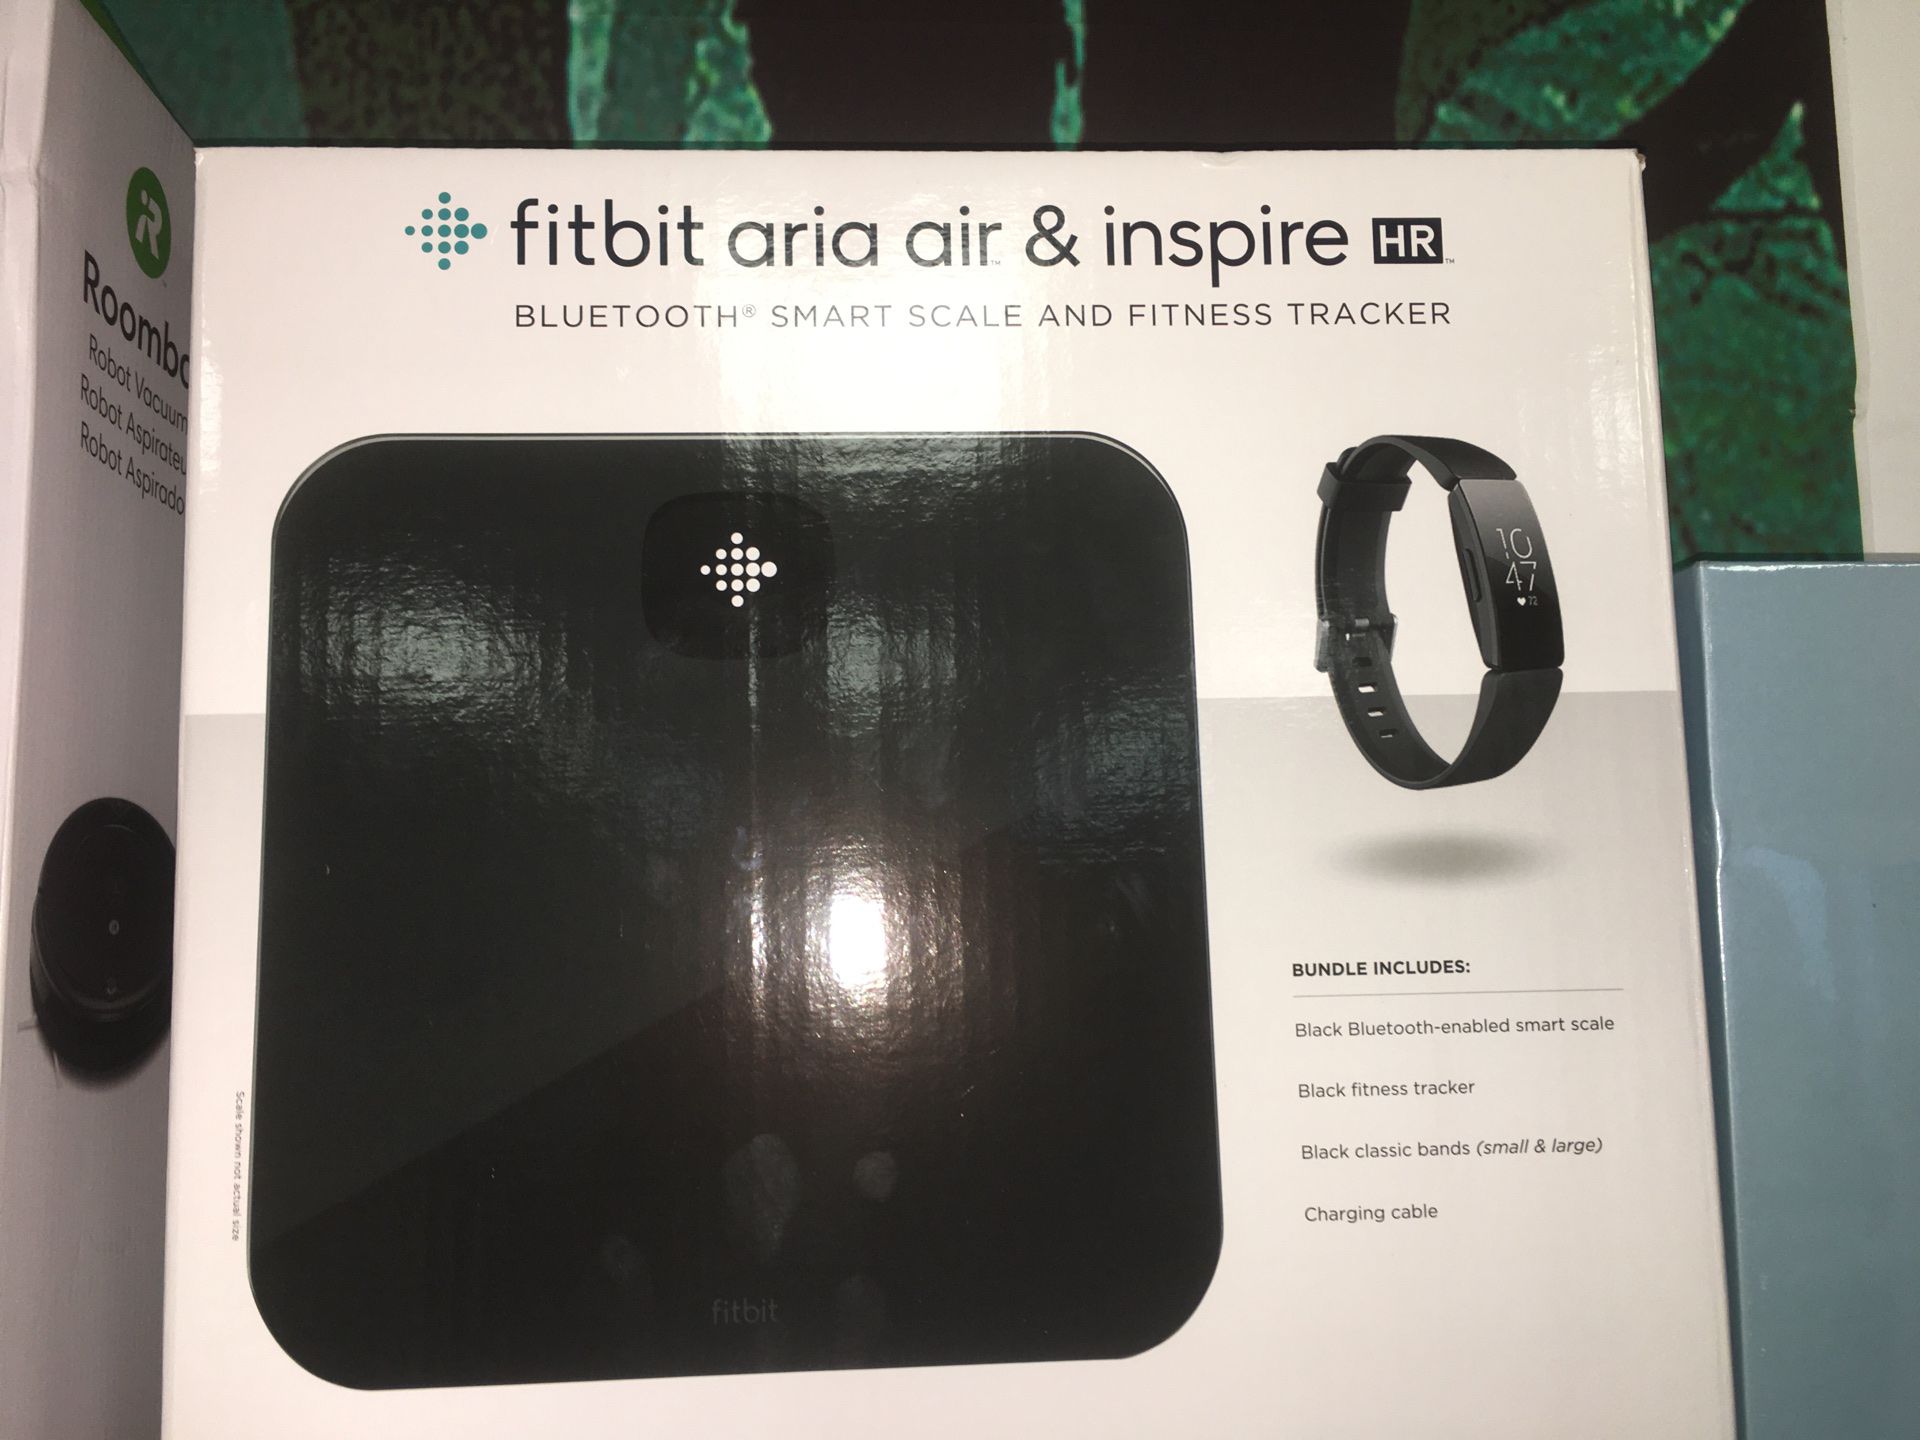 Fitbit Aria Air& Inspire HR smart scale and fitness tracker